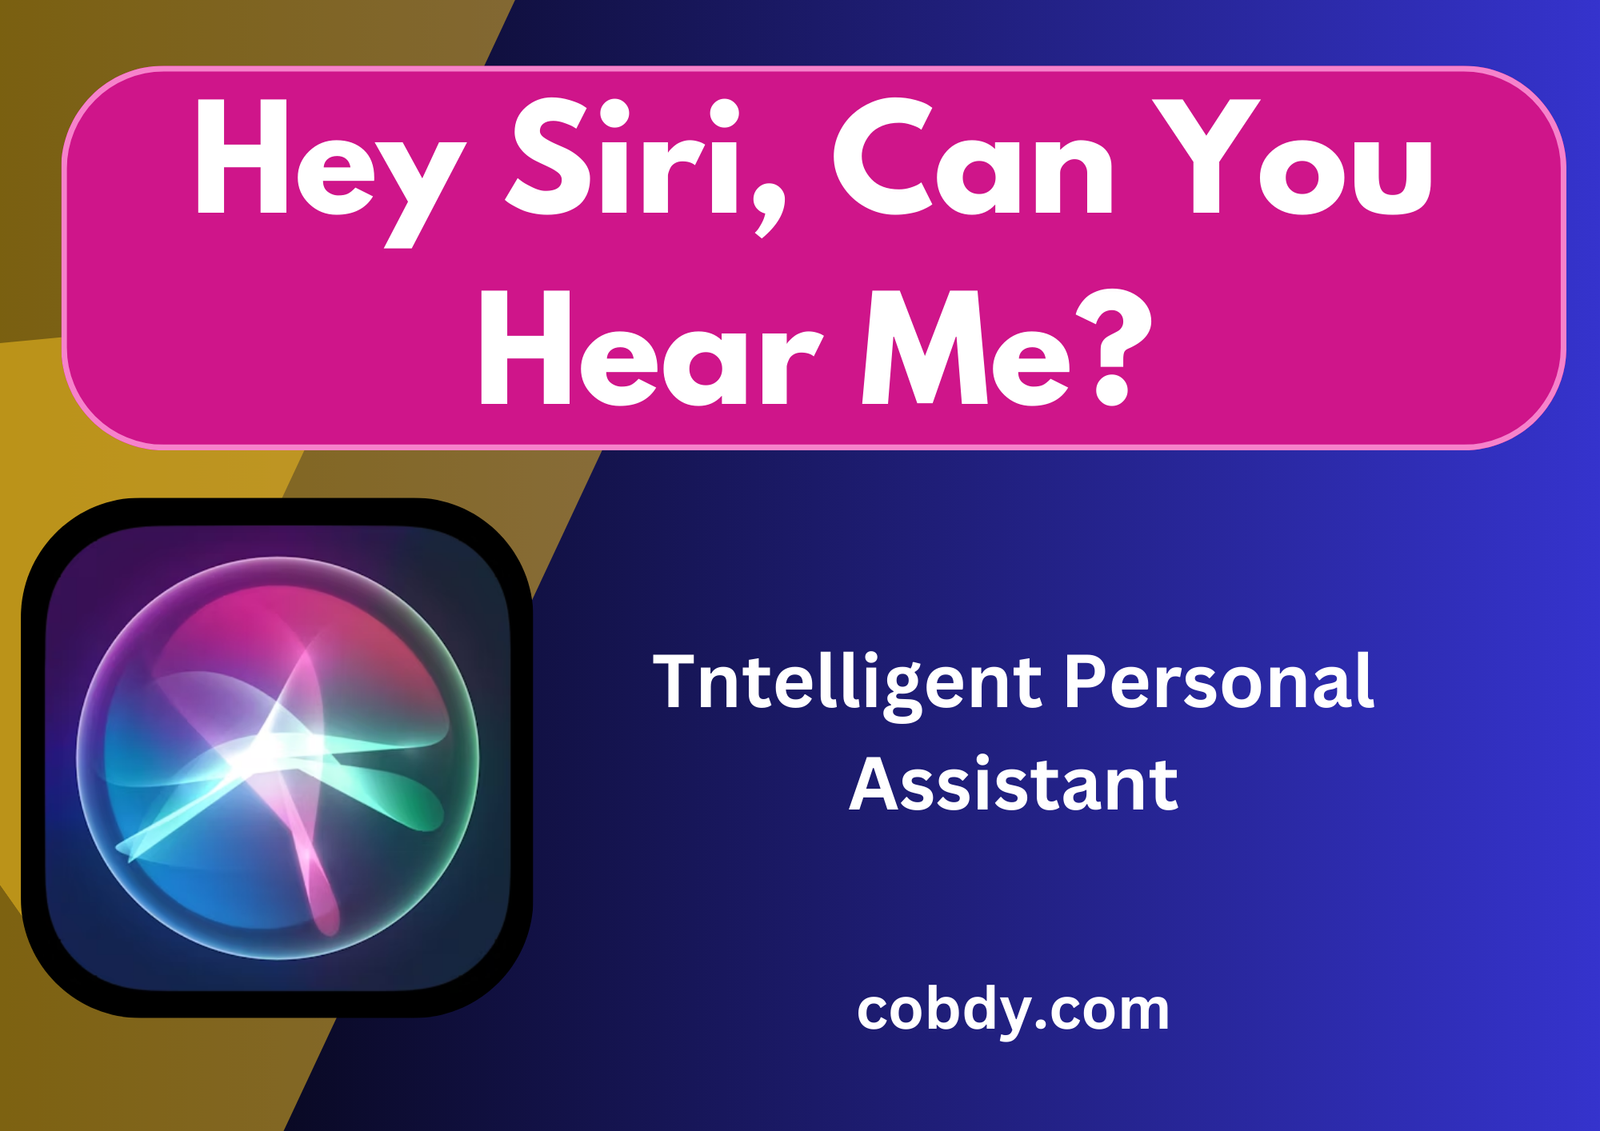 Hey Siri, can you hear me? Siri, the intelligent personal assistant built into Apple devices.